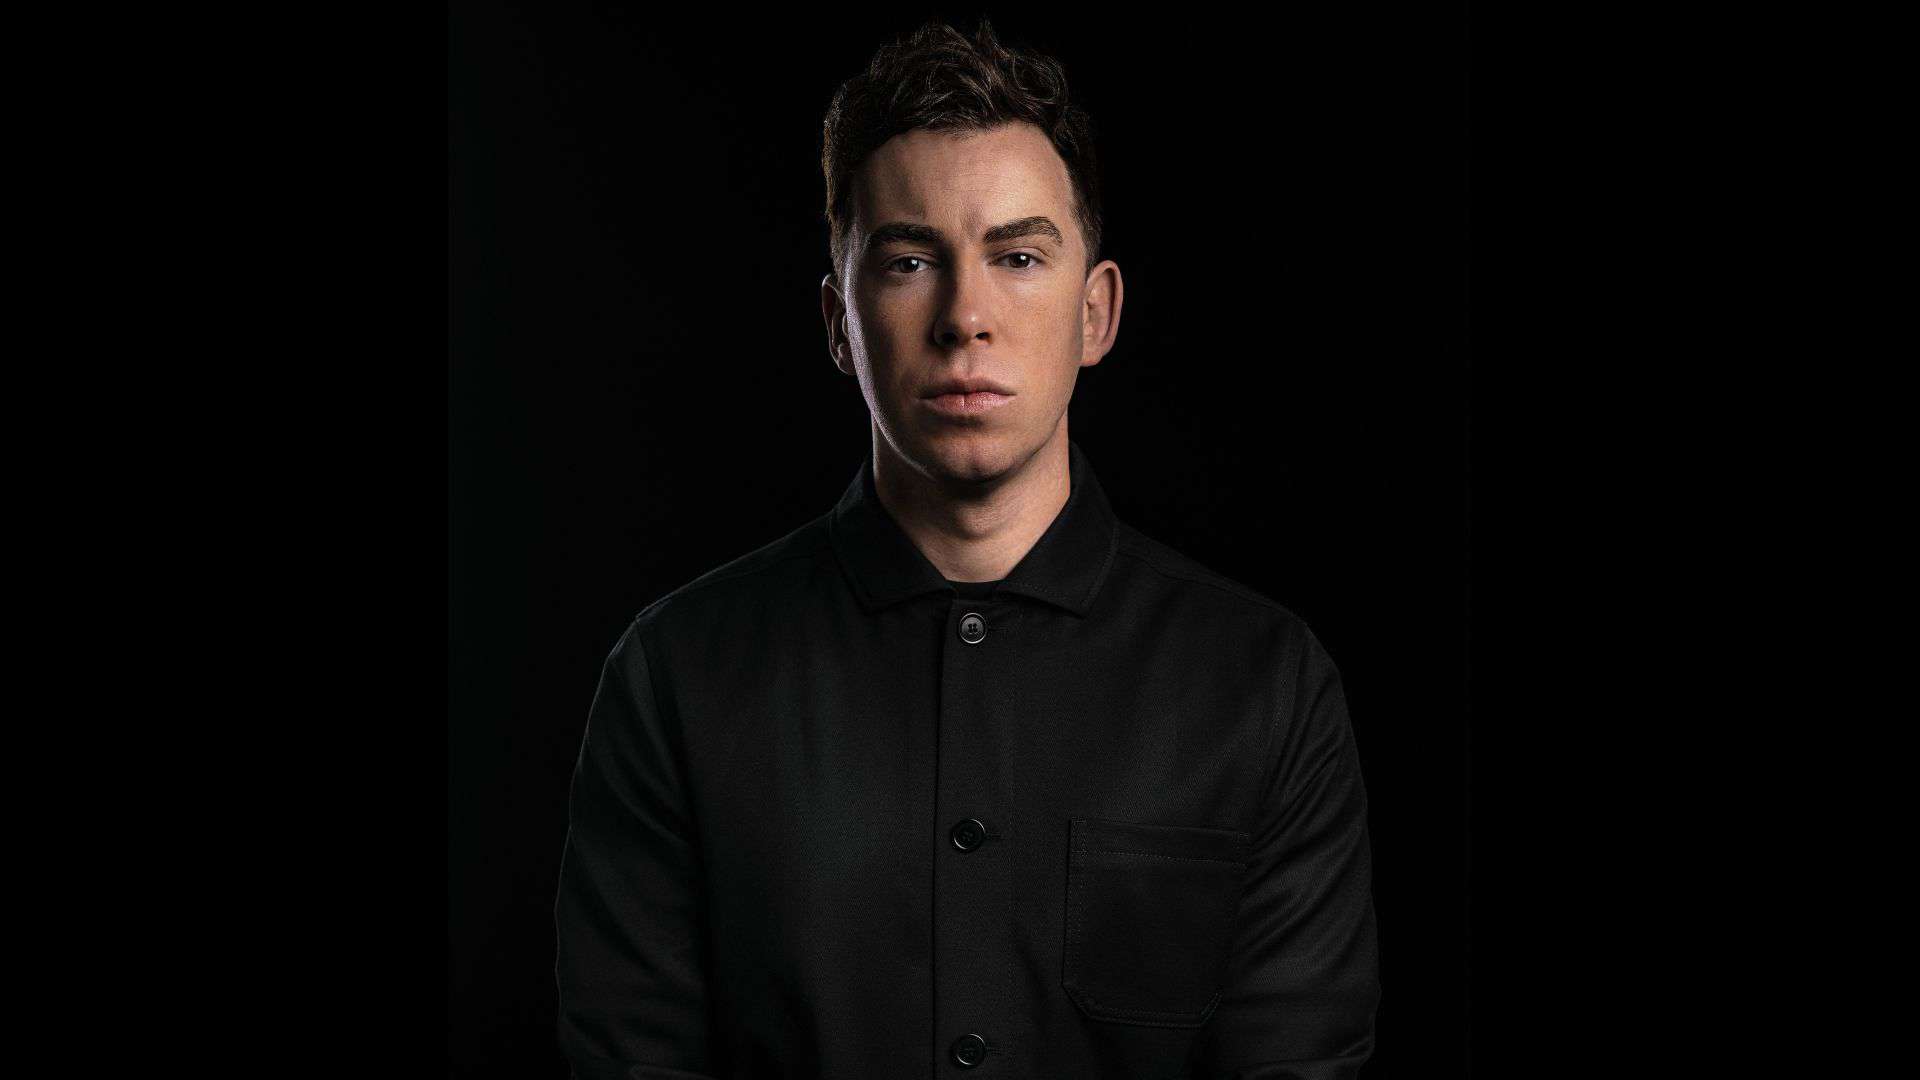 Hardwell and Machine Made collaborate on powerful rework of ‘Human’: Listen